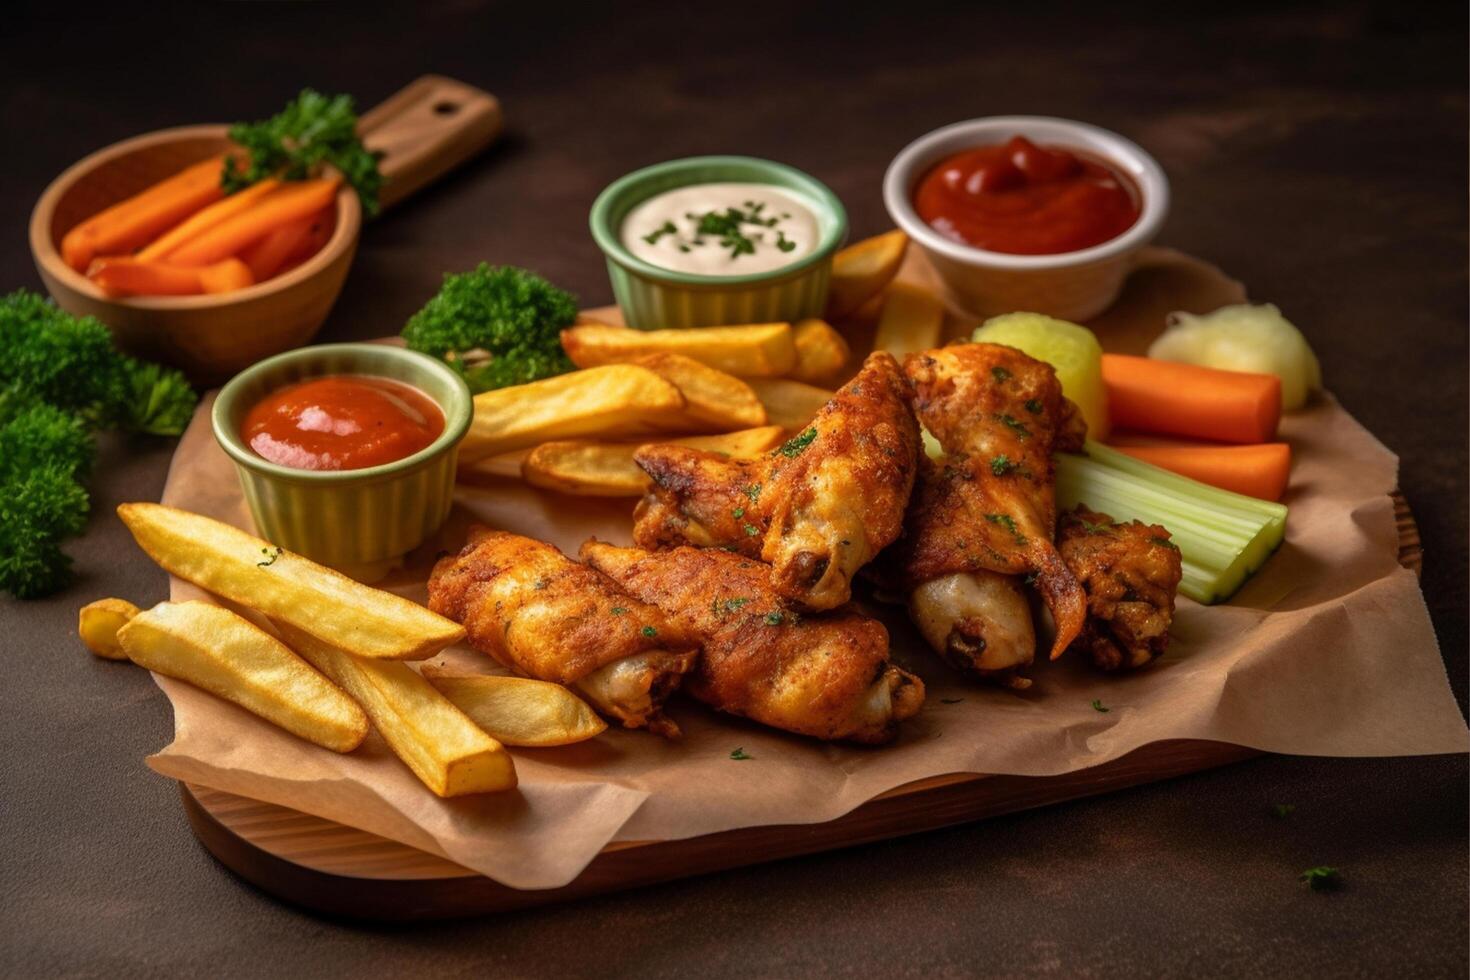 Roasted chicken wings and French fries served on a wooden board, photo